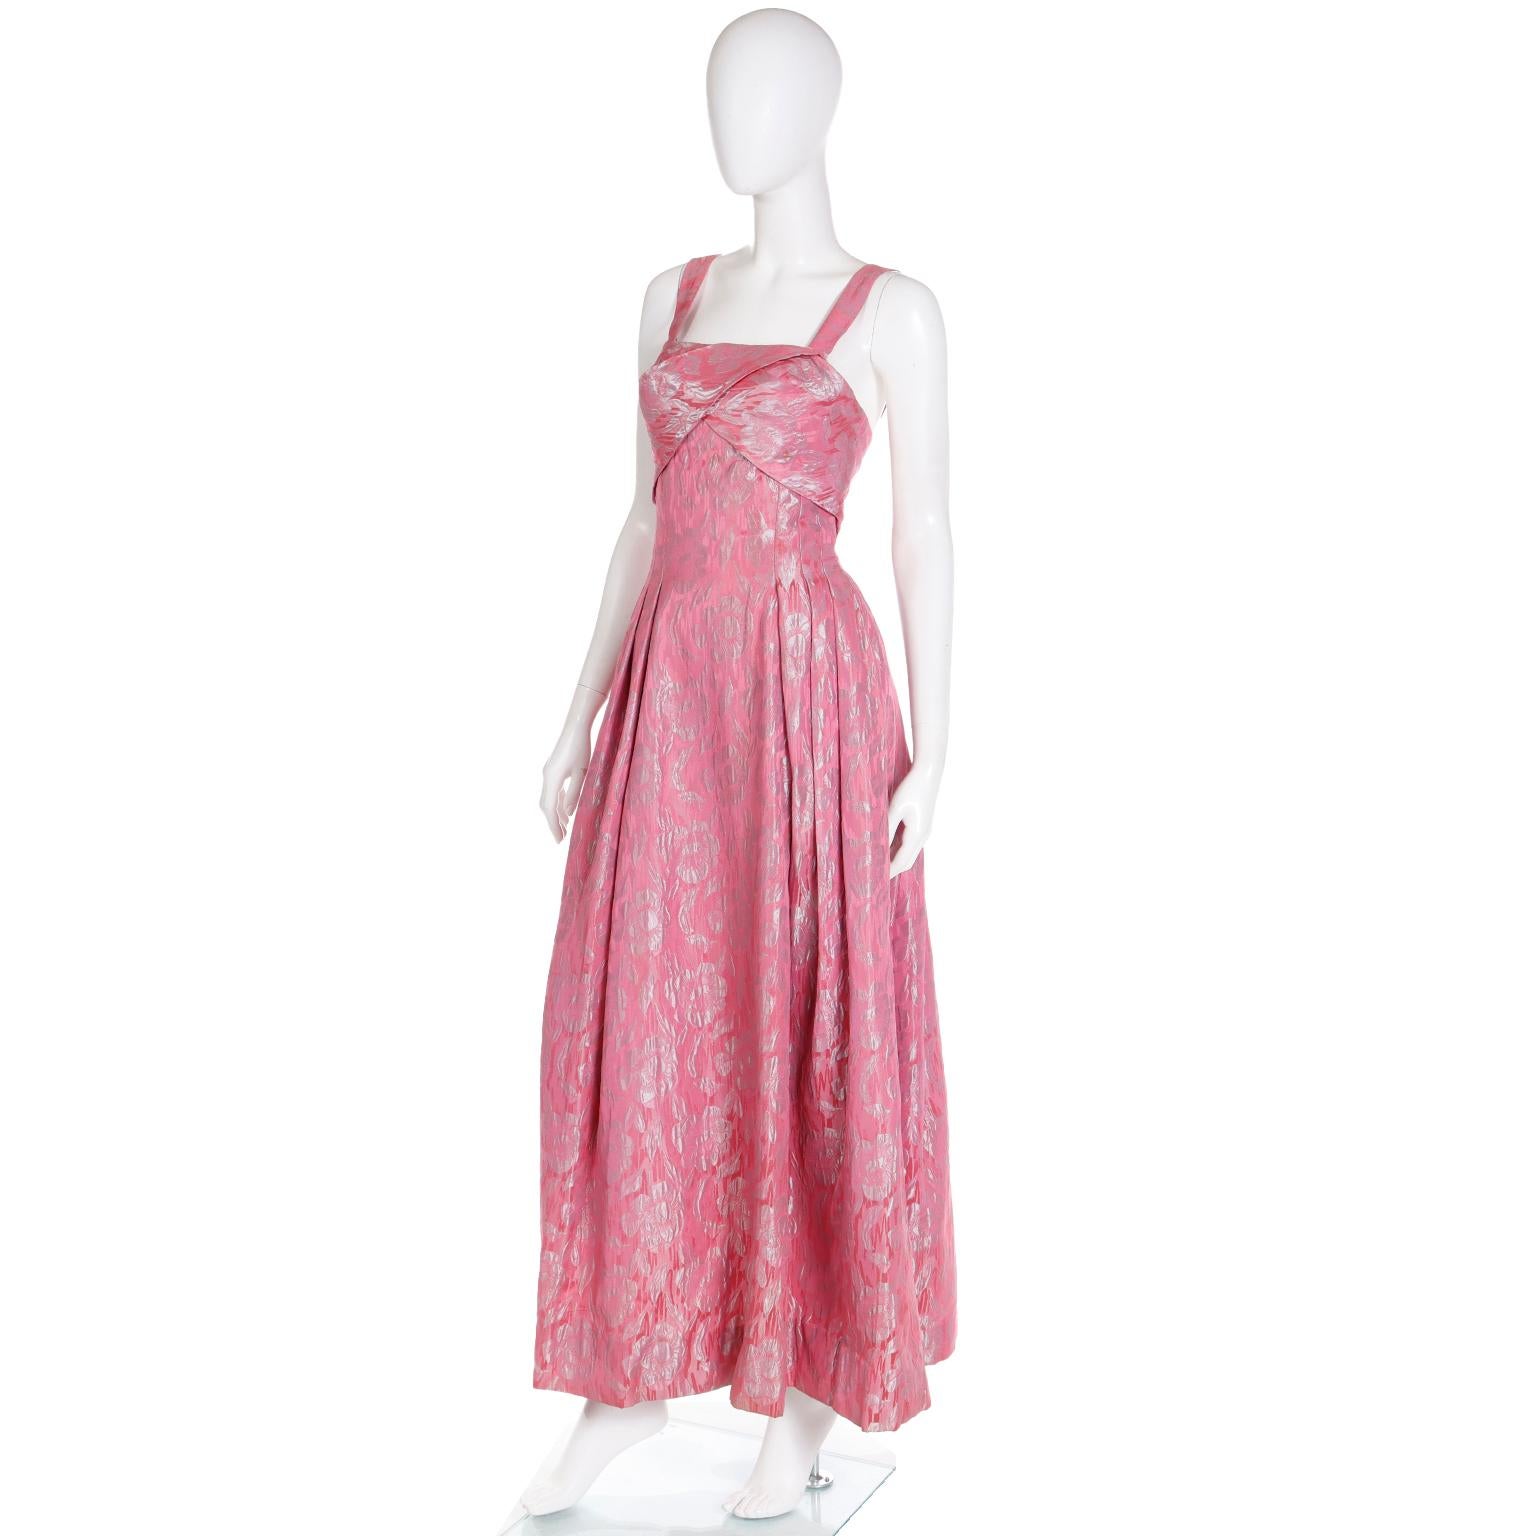 Norman Young 1950s Vintage Pink Jacquard Evening Gown 1